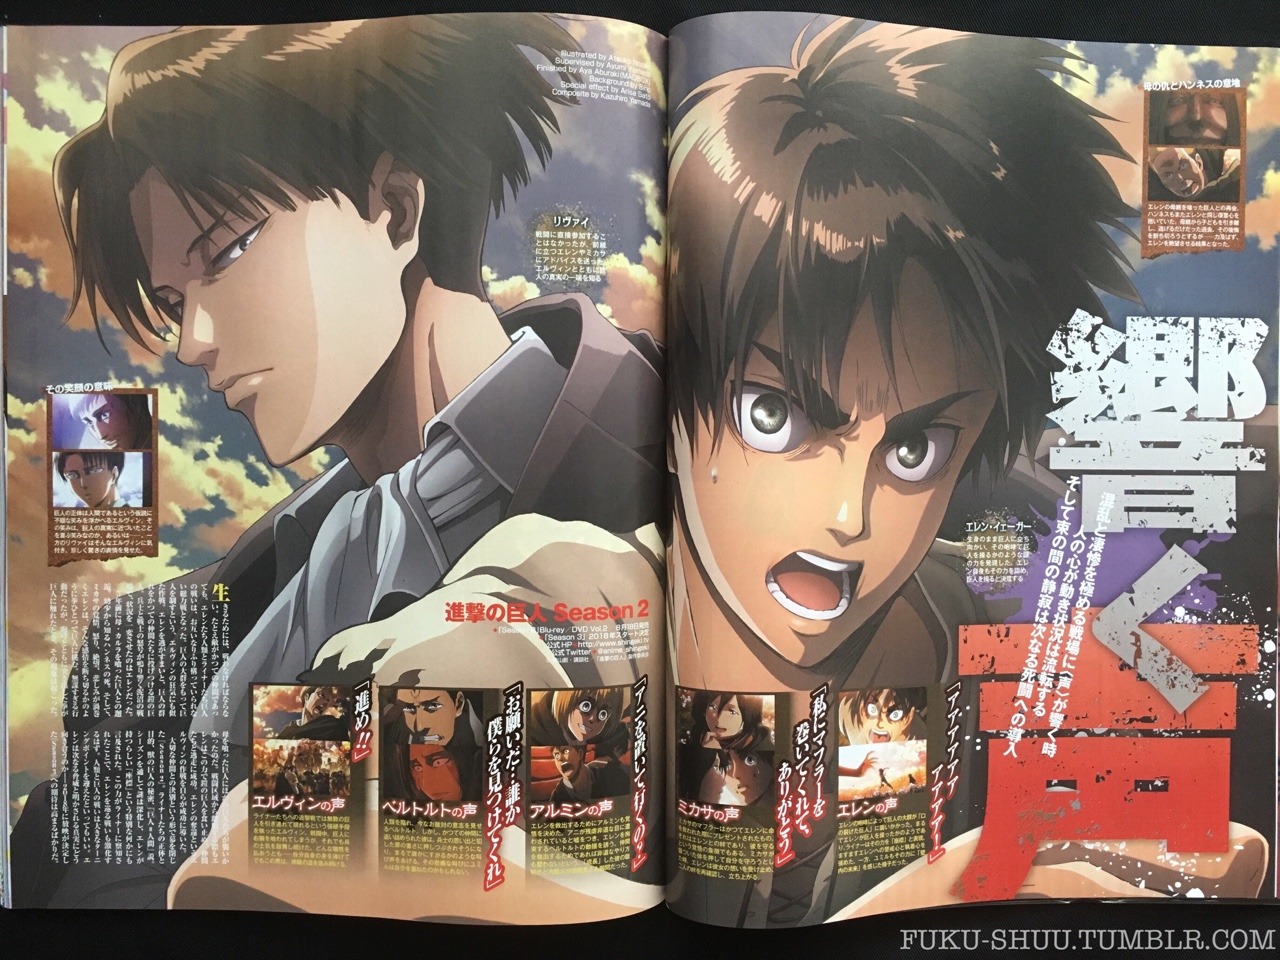 SnK News: New Season 2 Visuals from Animage &amp; Newtype August 2017 issuesBoth